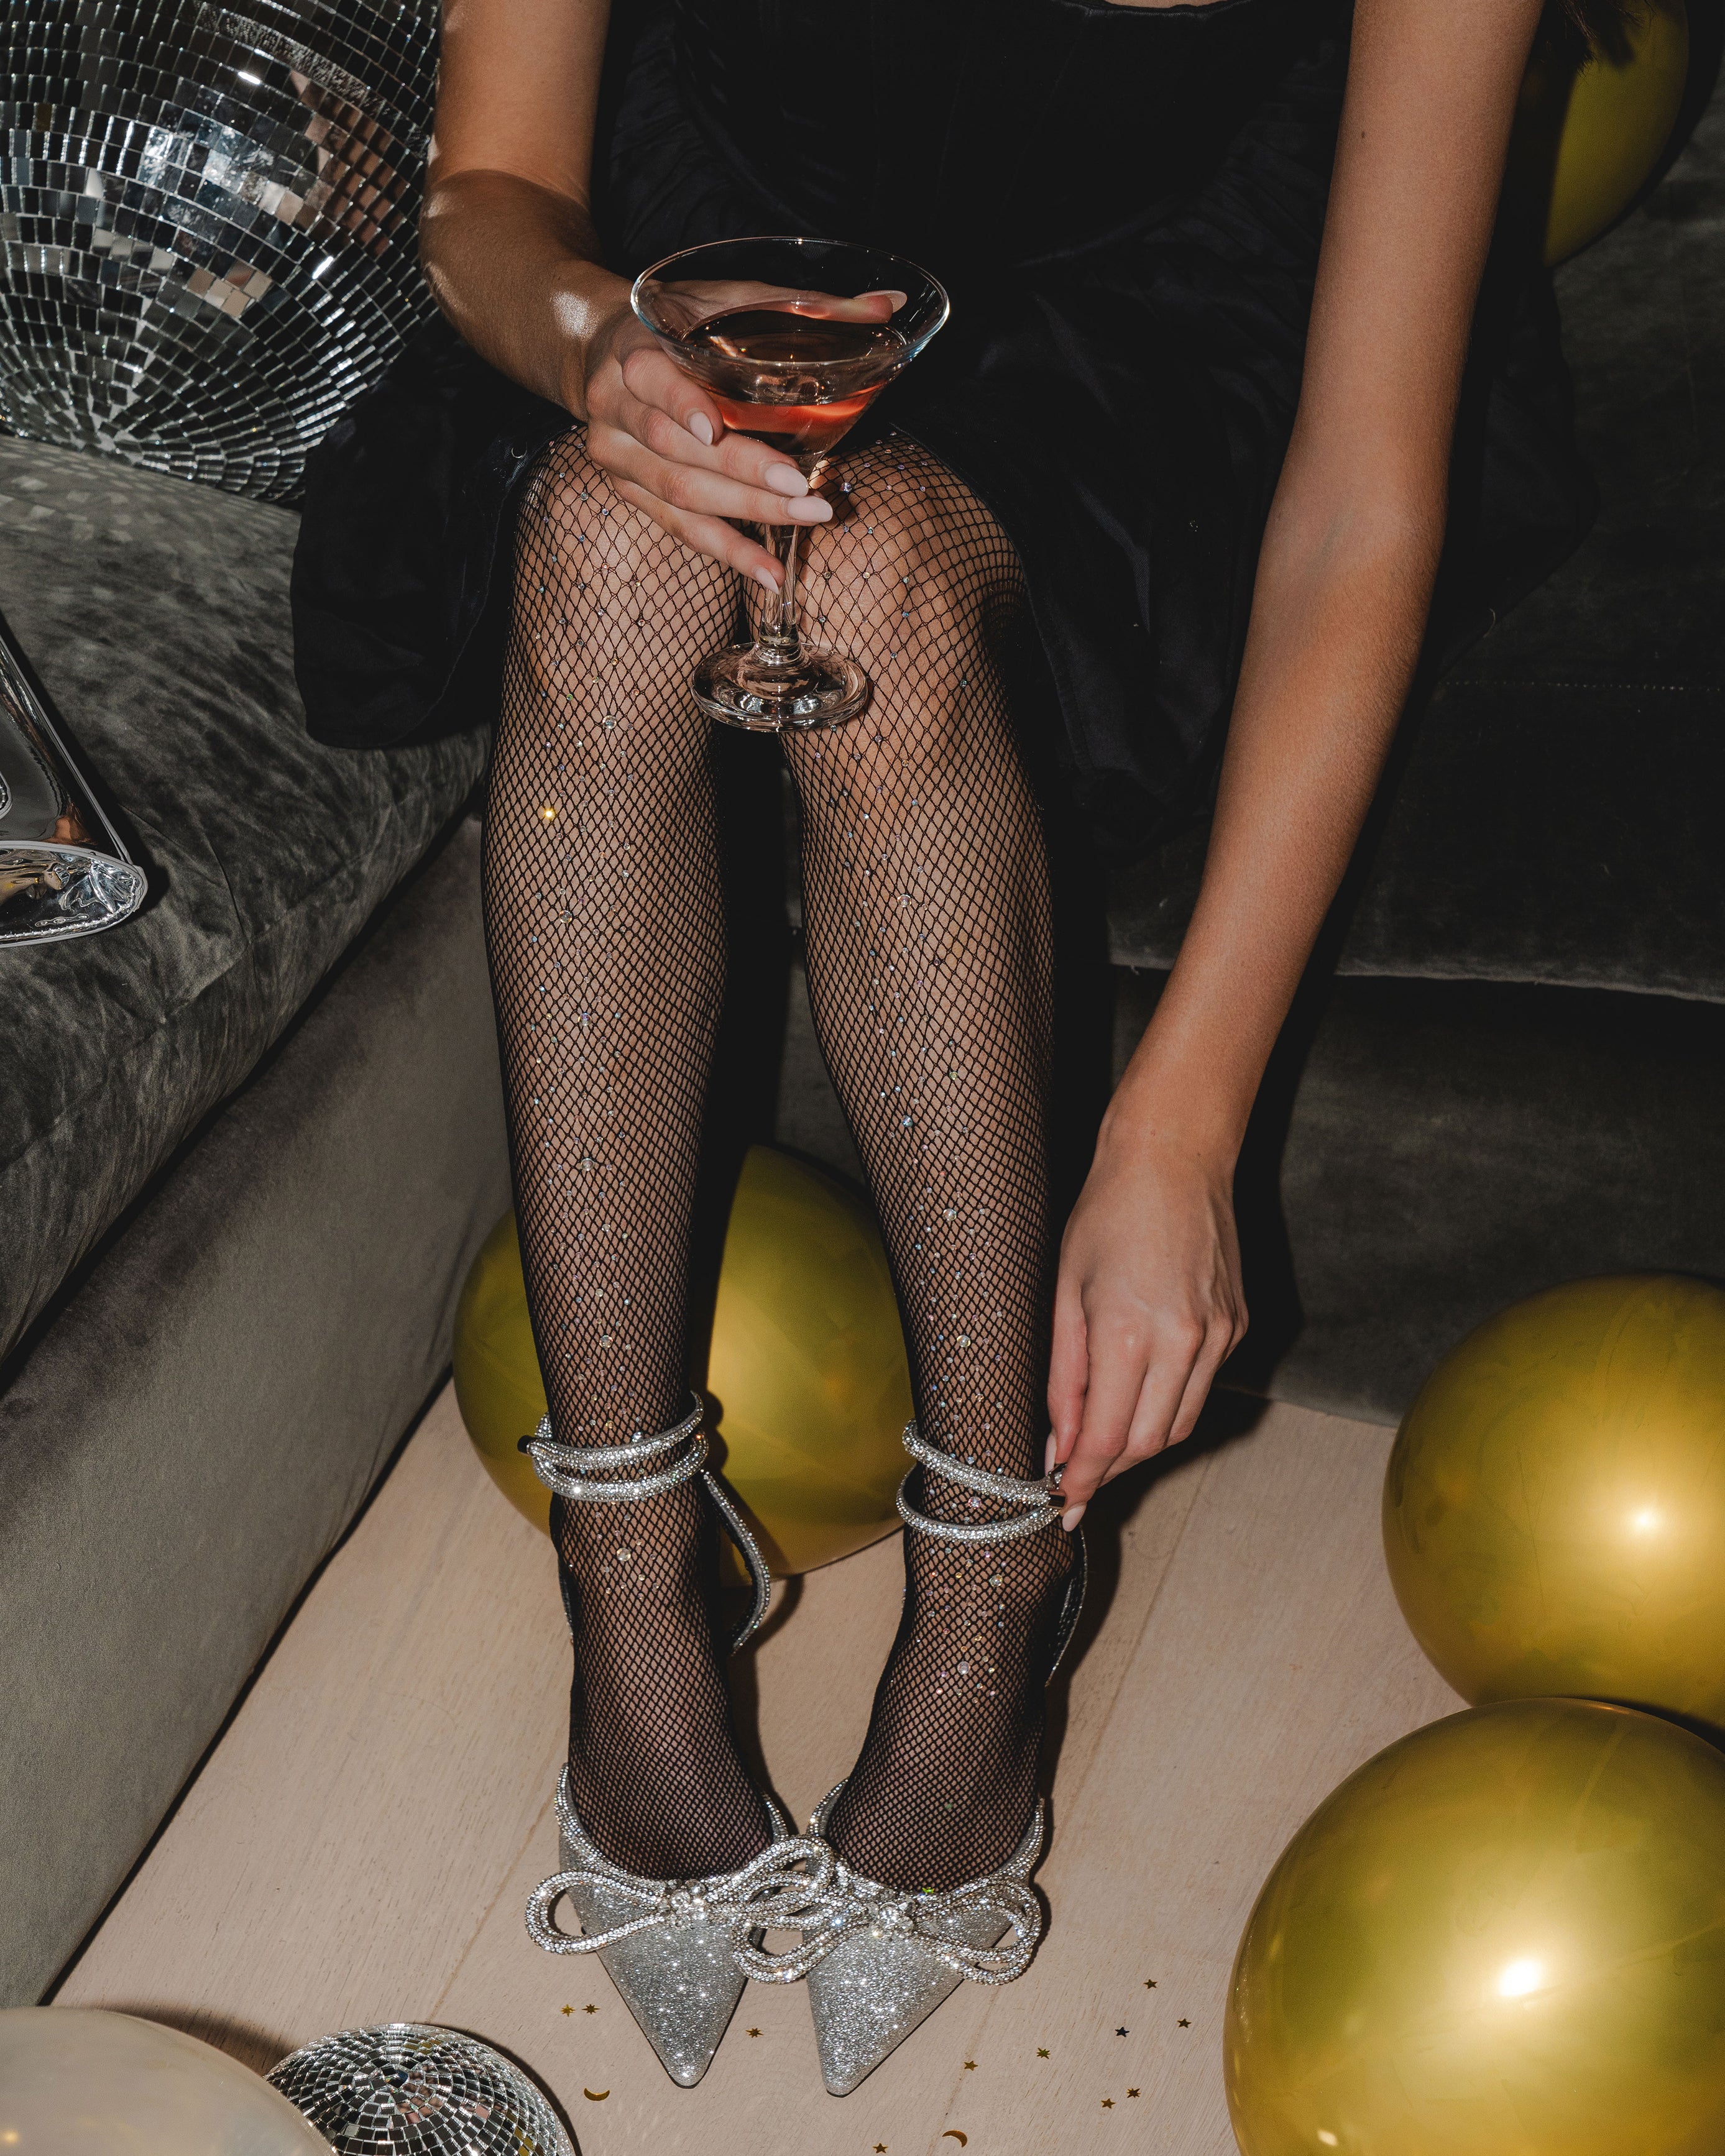 Scatter Rhinestone Fishnet Tights in Black| Hosiery | Tights | Party | Christmas | new years | Glam | Going Out | Halloween | Costume | Glitter | Sparkly | Accessories | Women's Accessories | Accessory | Autumn | Winter | Fall | Streetwear | rhinestone | diamante | fishnet